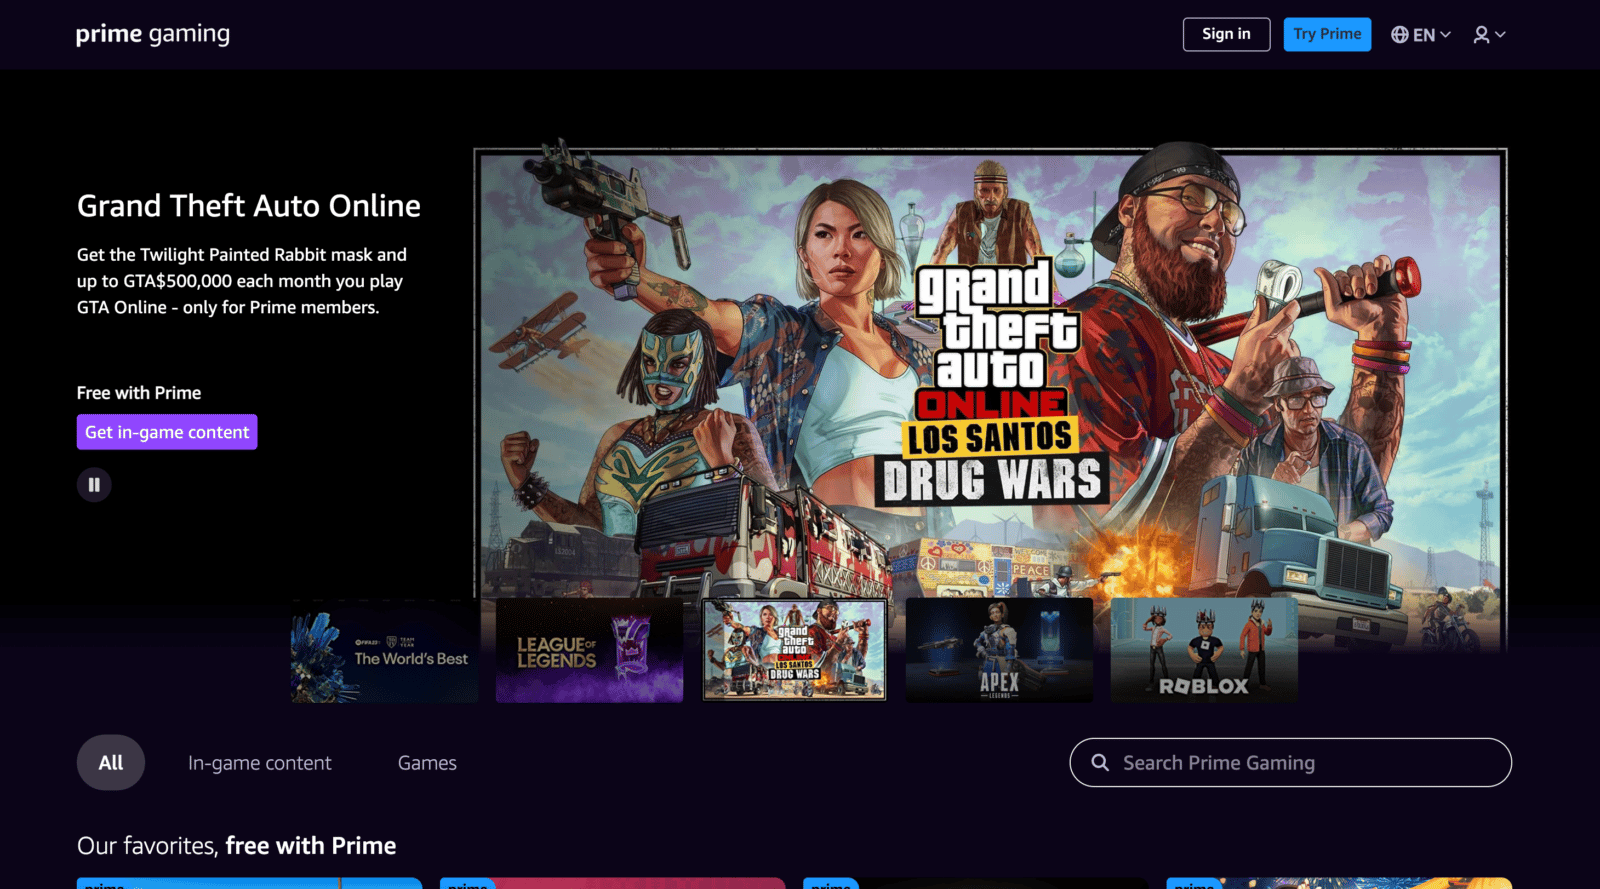 What Exactly Is Prime Gaming? (Hint: It Used To Be Twitch Prime